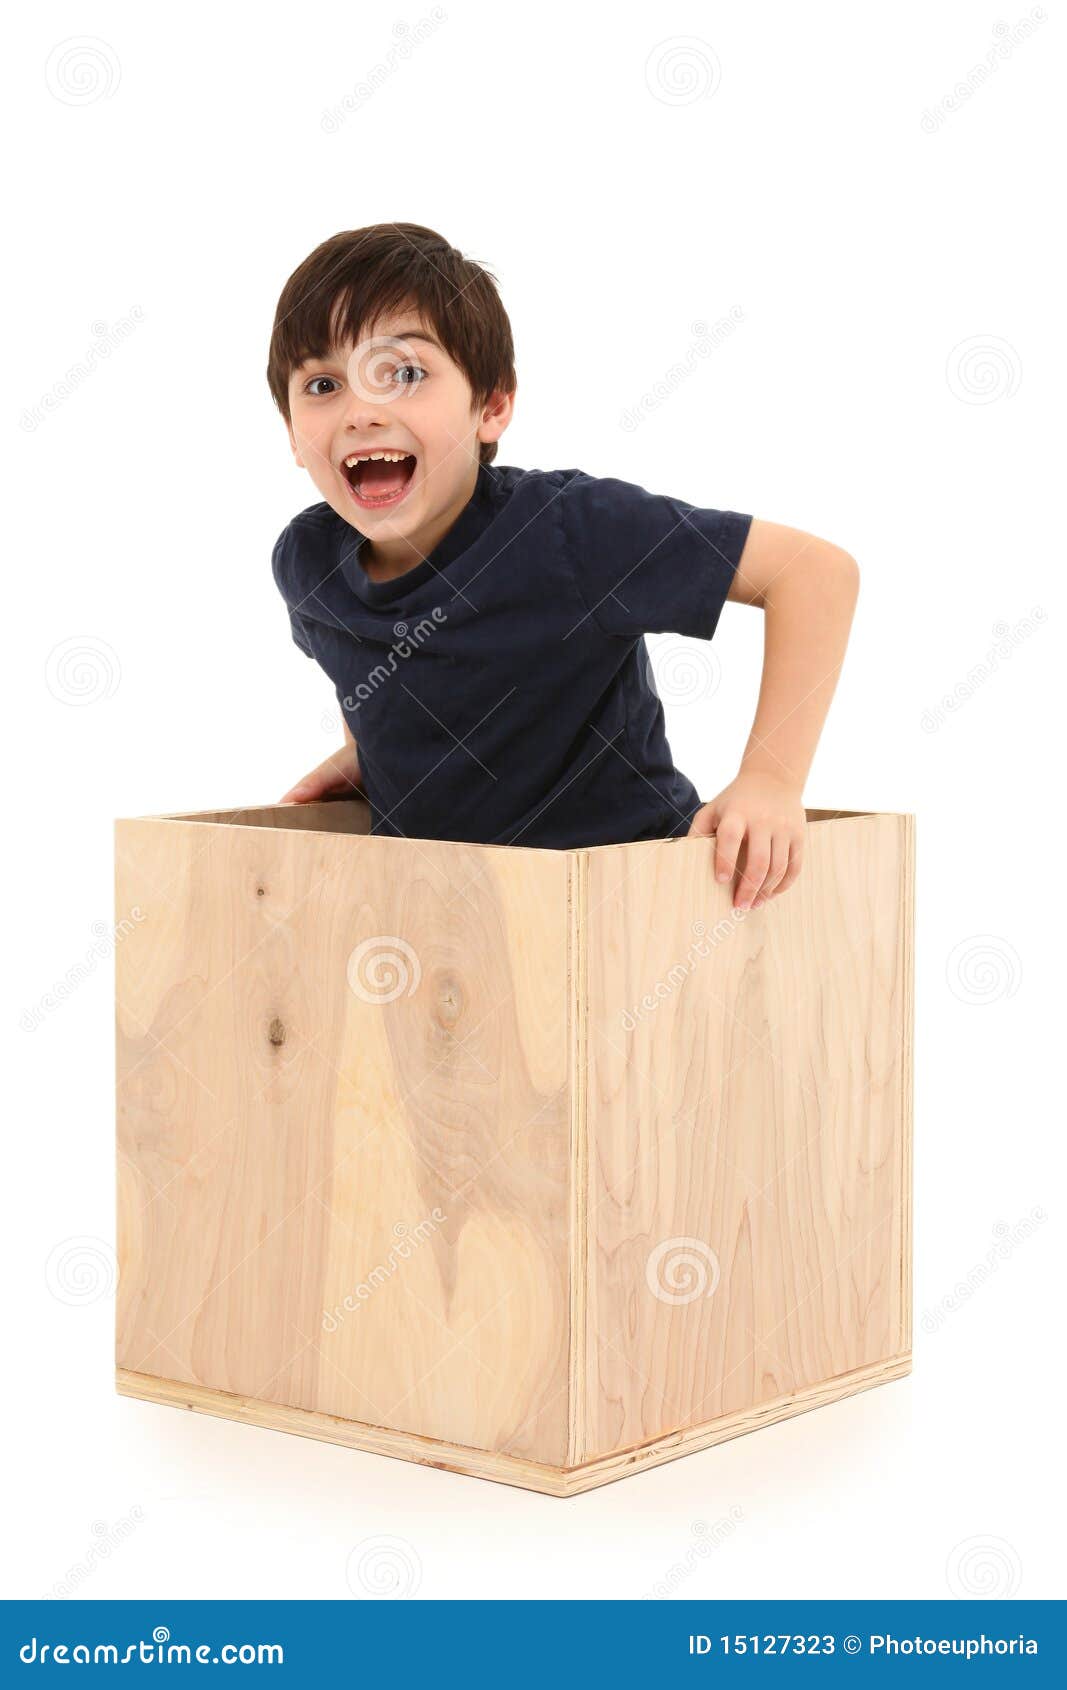 Boy in a Box stock image. Image of male, caucasian, brunette - 15127323